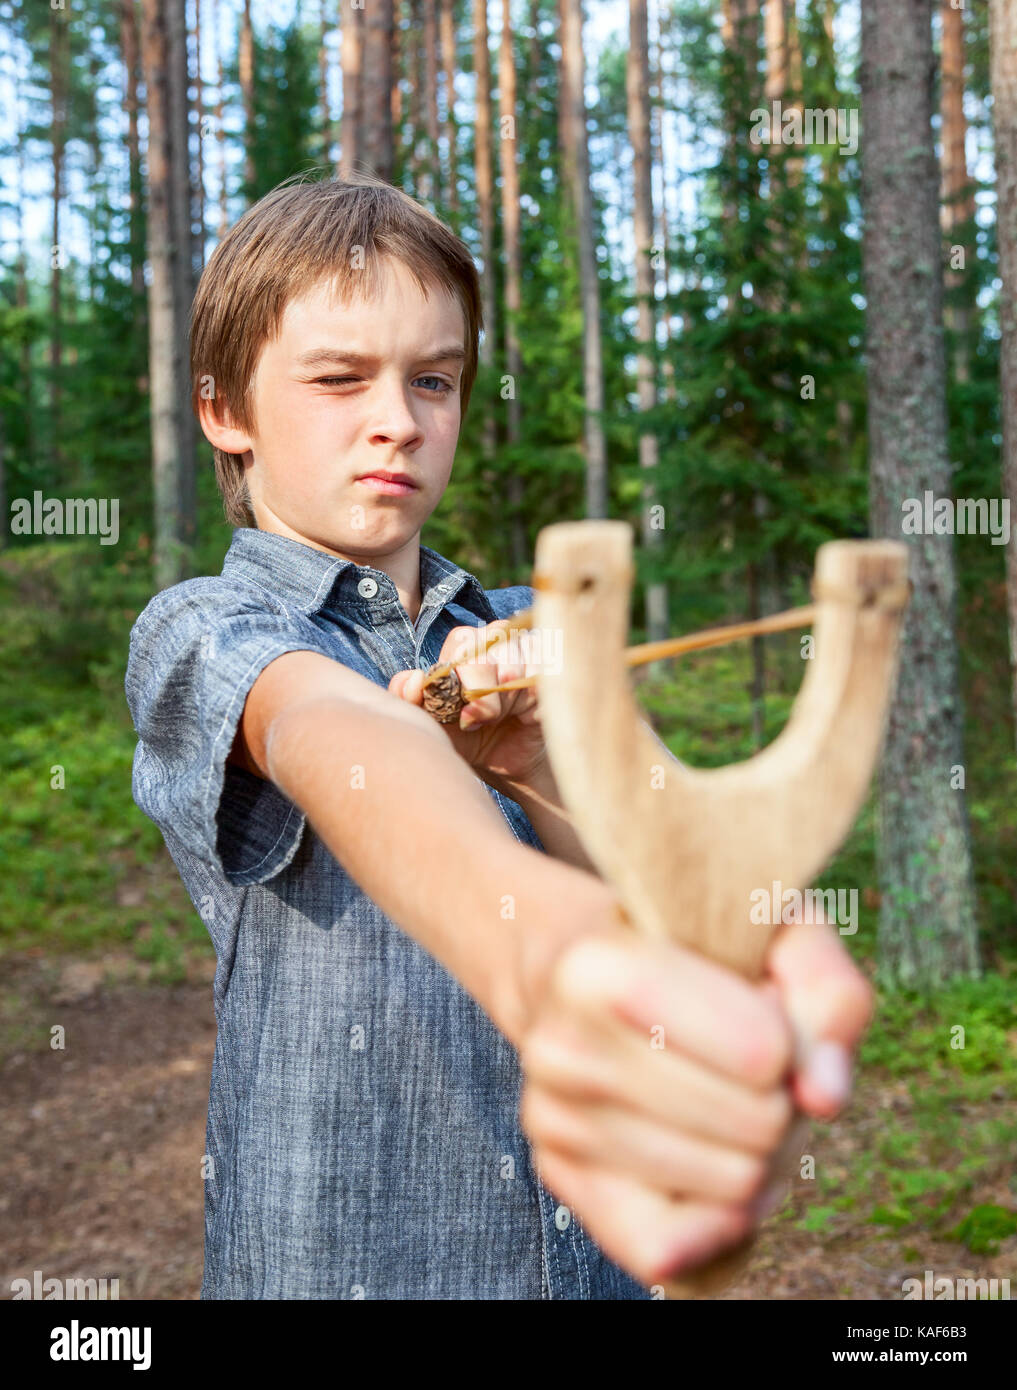 Boy aiming wooden slingshot outdoors Stock Photo